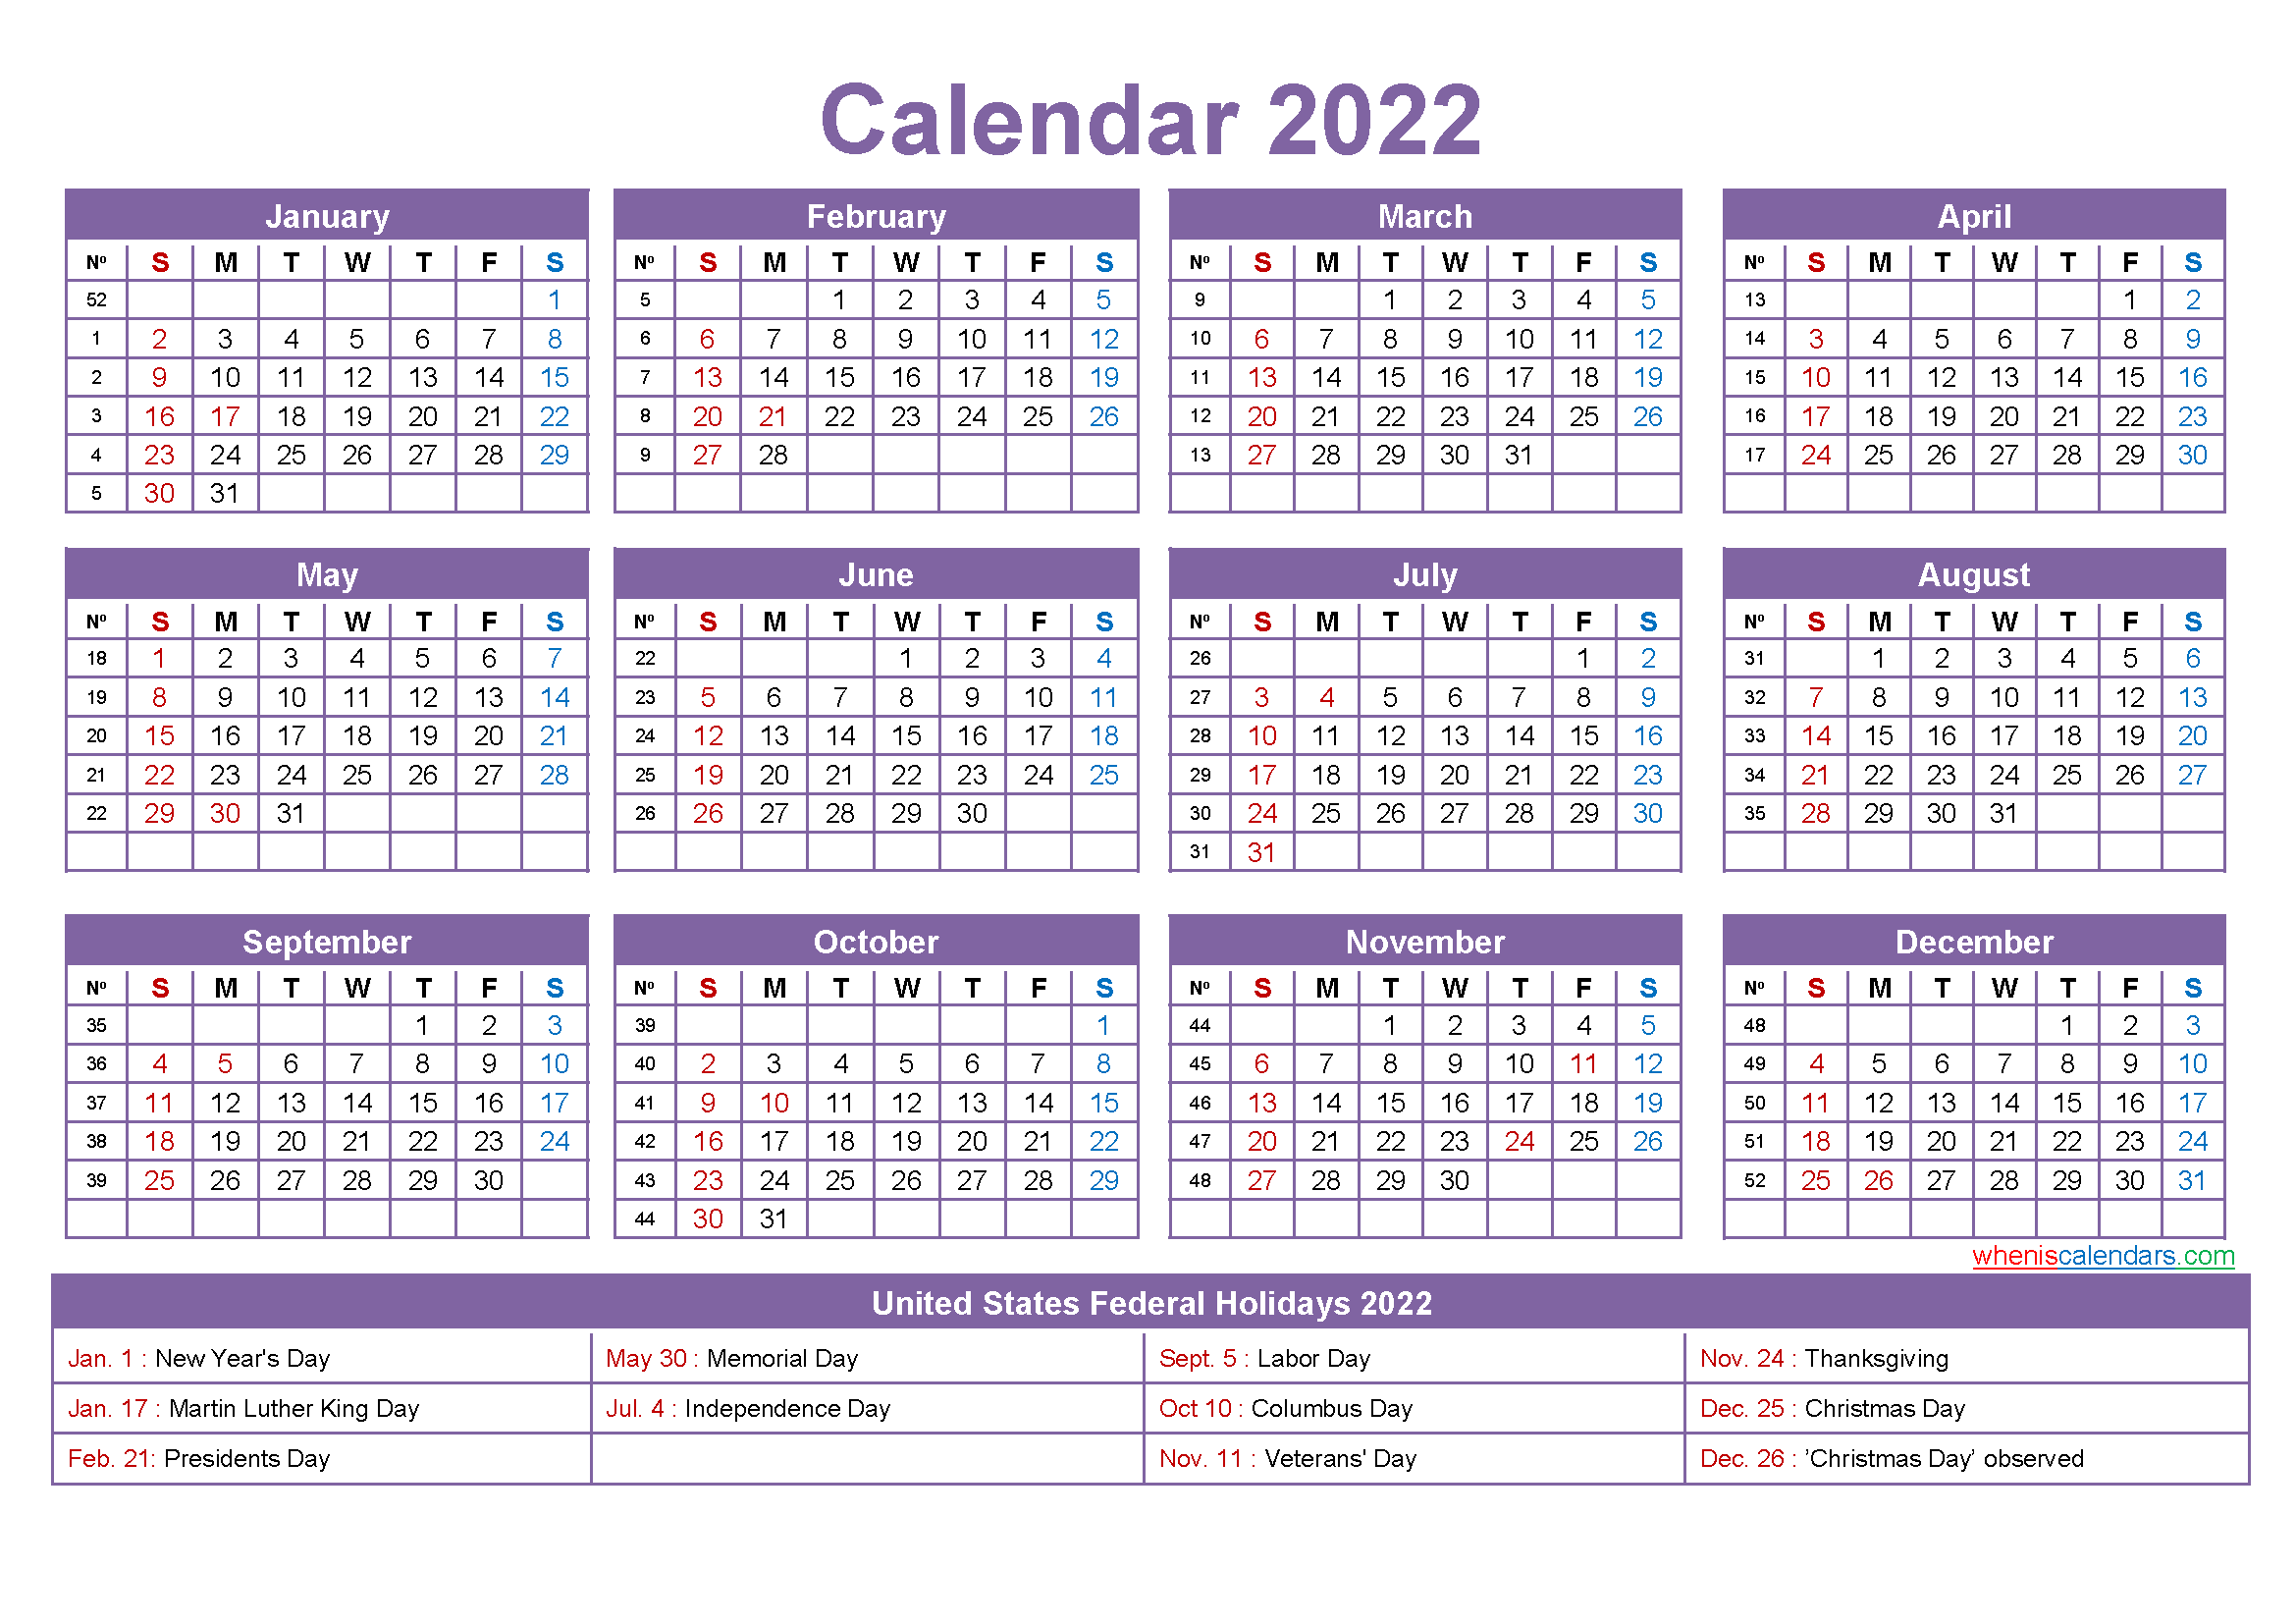 Computer Desktop Calendar 2022 Computer Desktop Calendar 2022 With Holidays